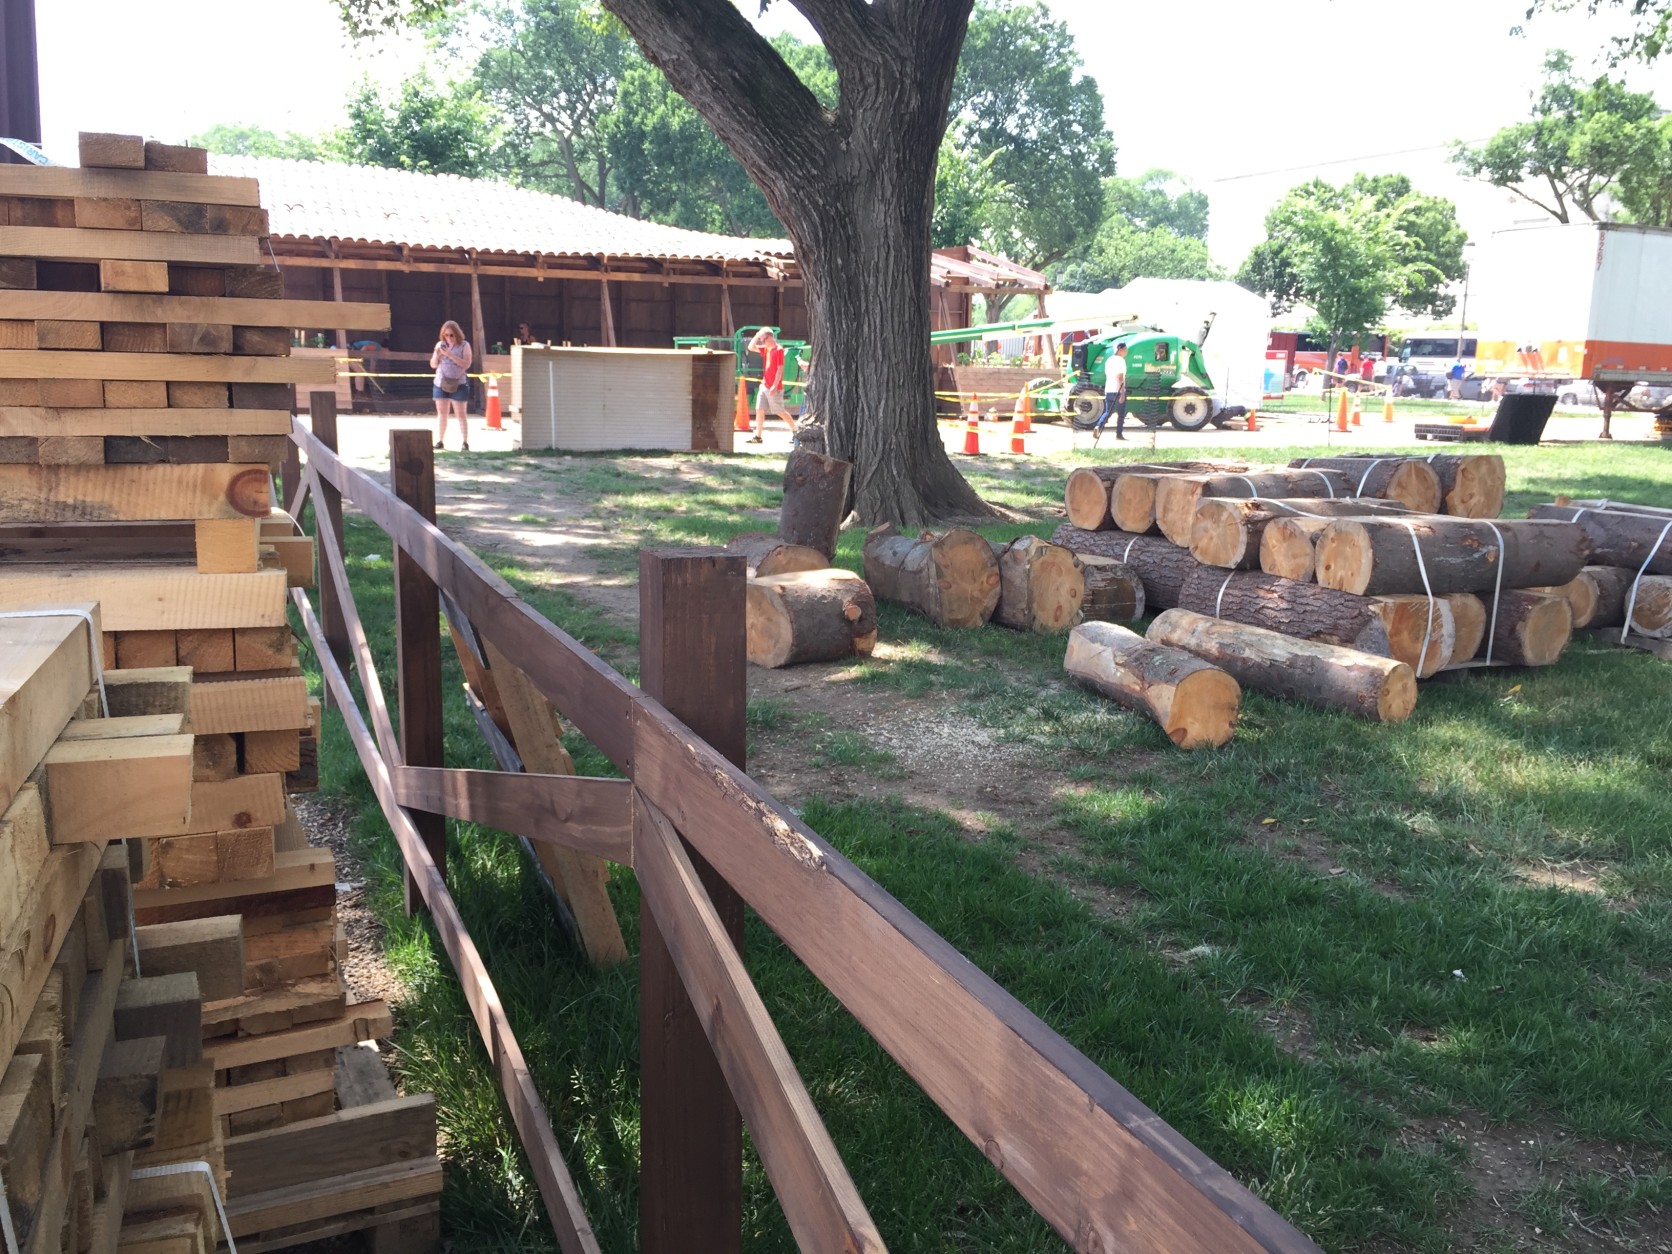 In the Basque area artisans will be building a boat during the course of the Folk Life Festival. (WTOP/Kristi King)